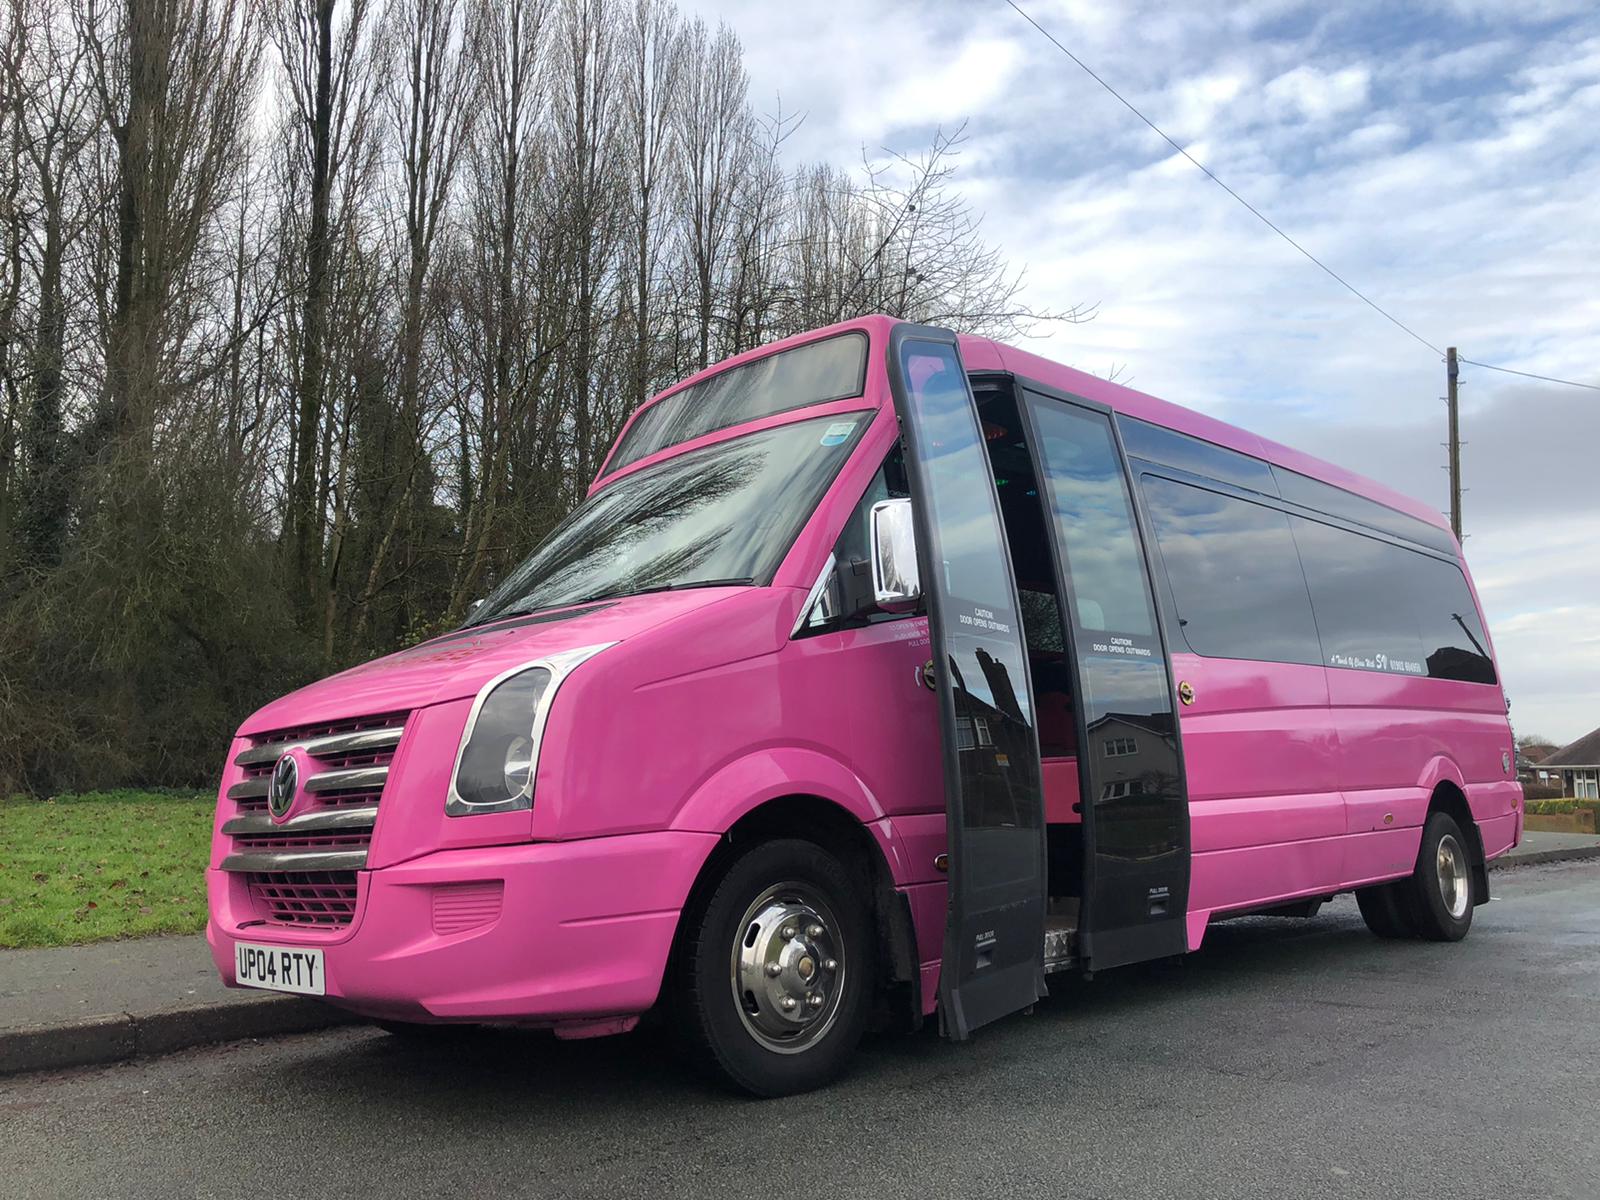 Planning a Group Night Out? Discover the Benefits of Hiring a Party Bus